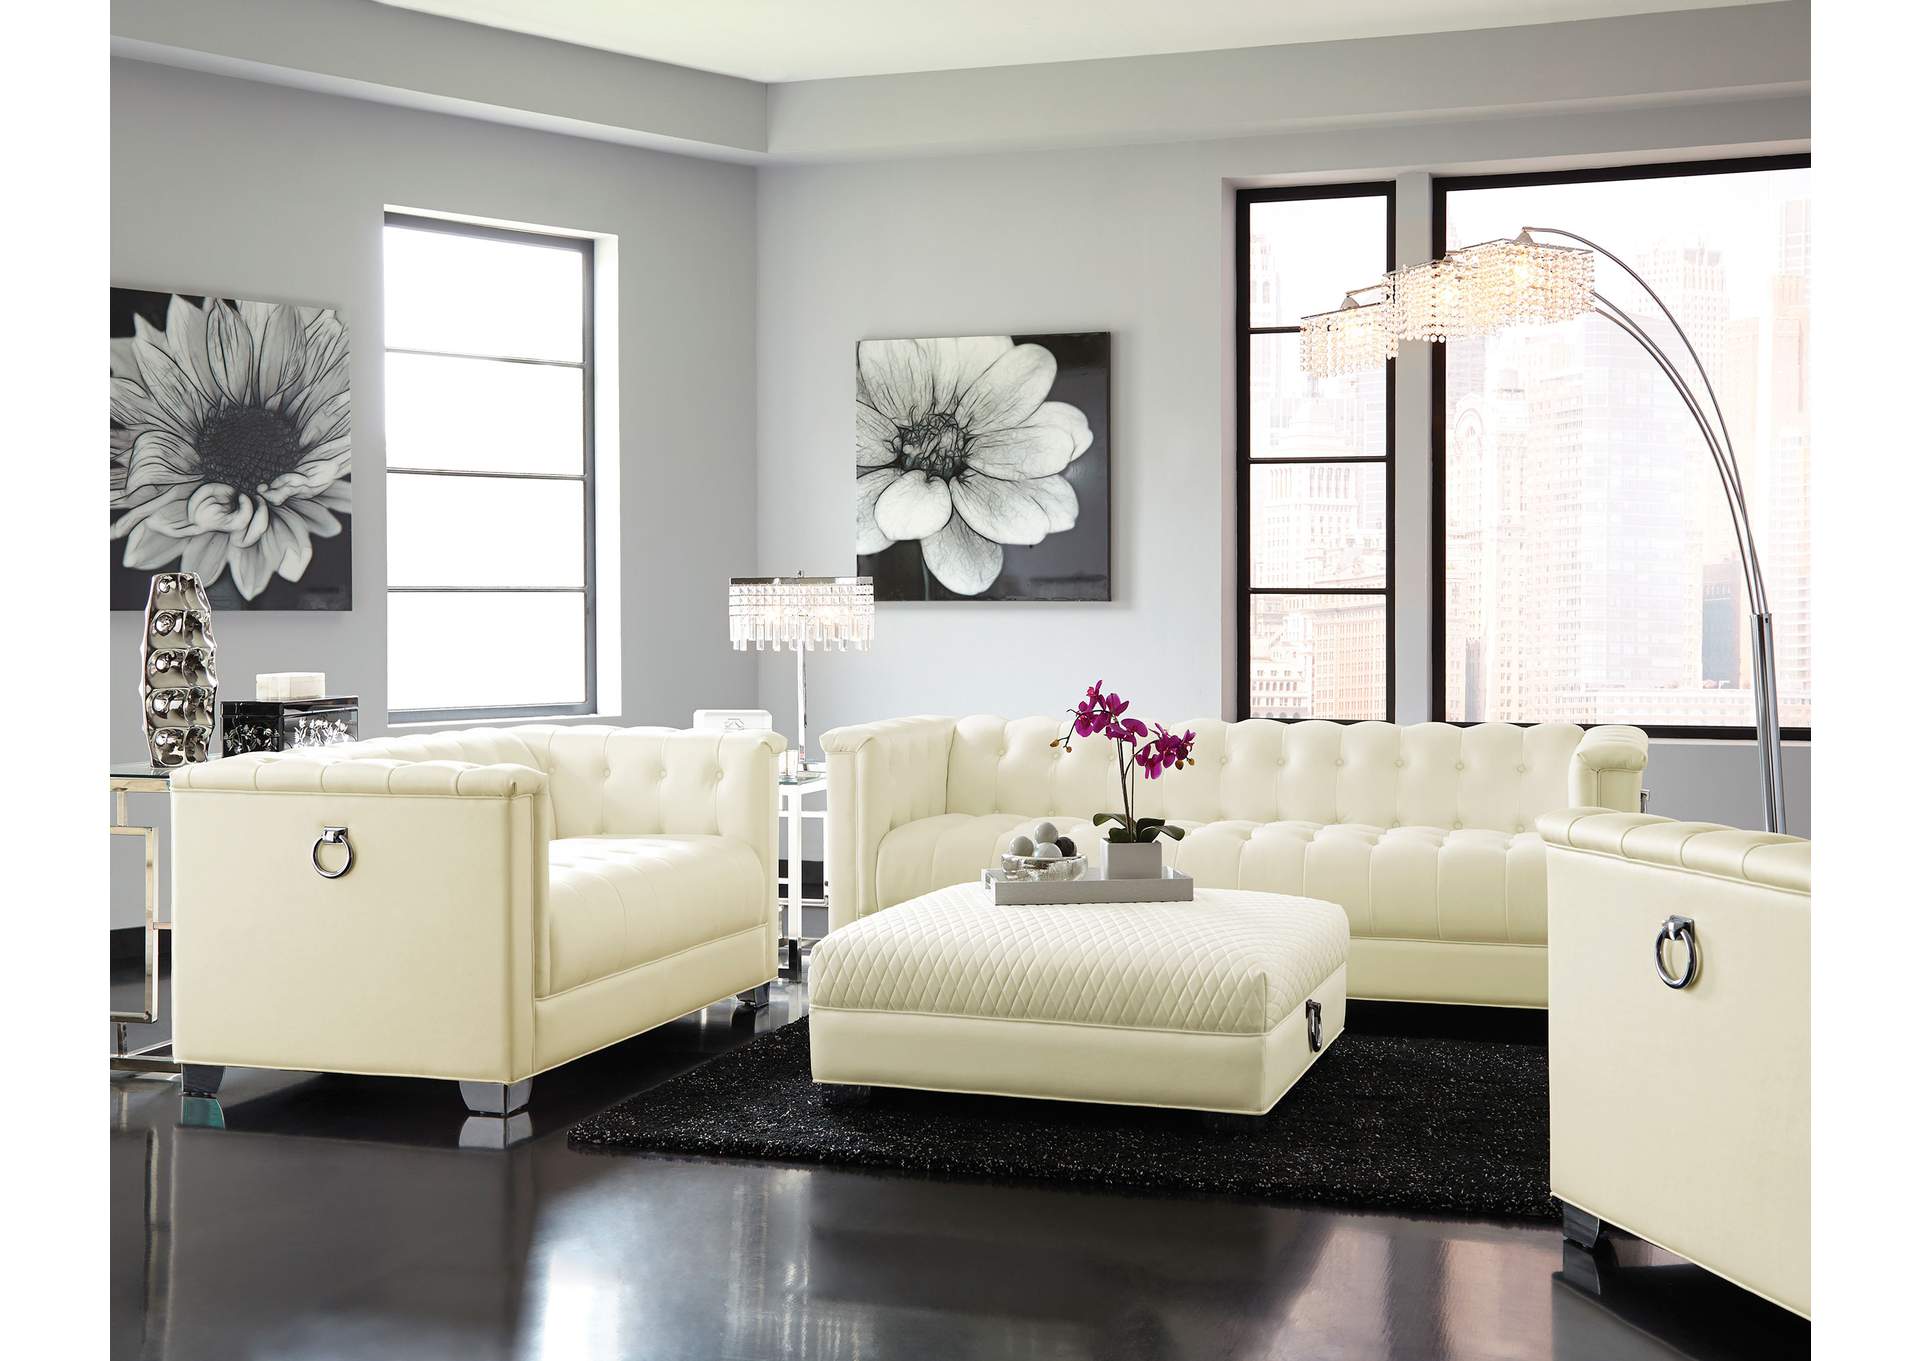 Chaviano Tufted Upholstered Sofa Pearl White,Coaster Furniture